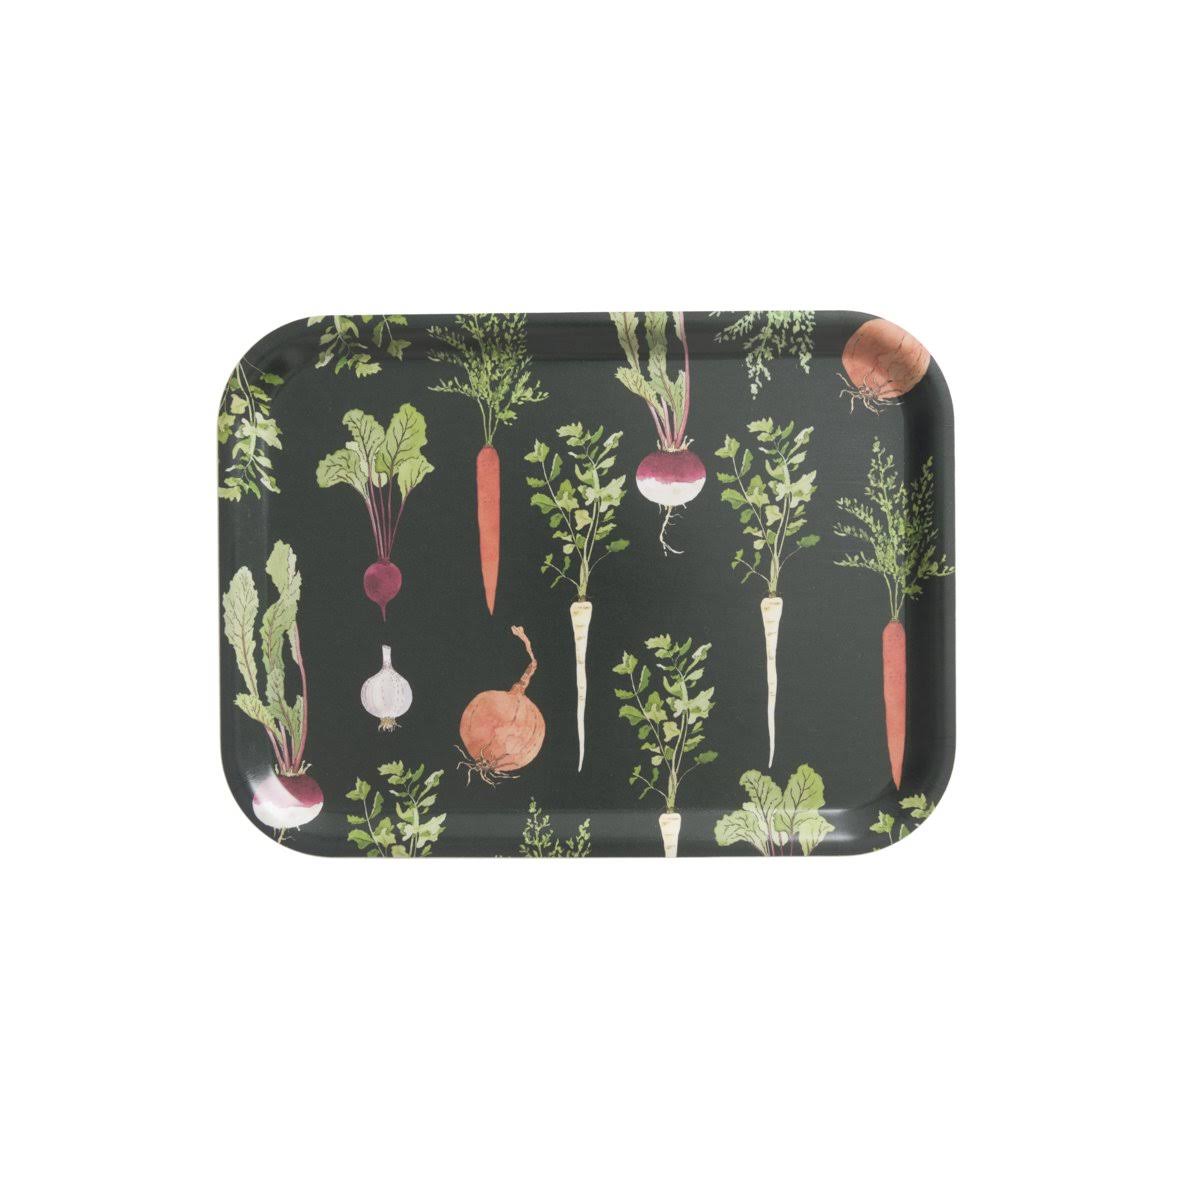 Home Grown Printed Tray by Sophie Allport